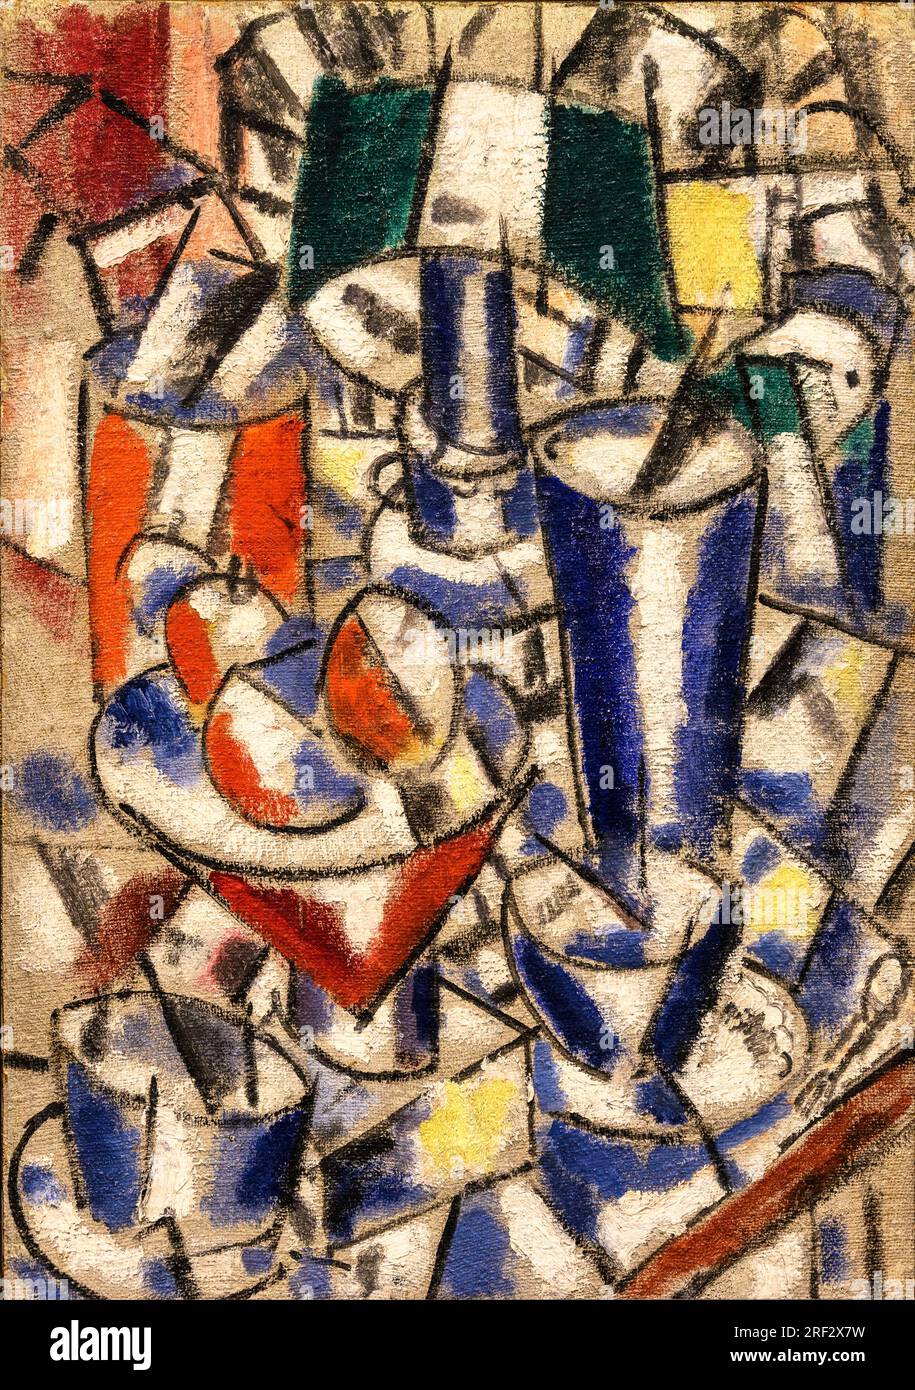 Still life with lamp by the French artist Fernand Leger, oil on canvas 1914 Stock Photo